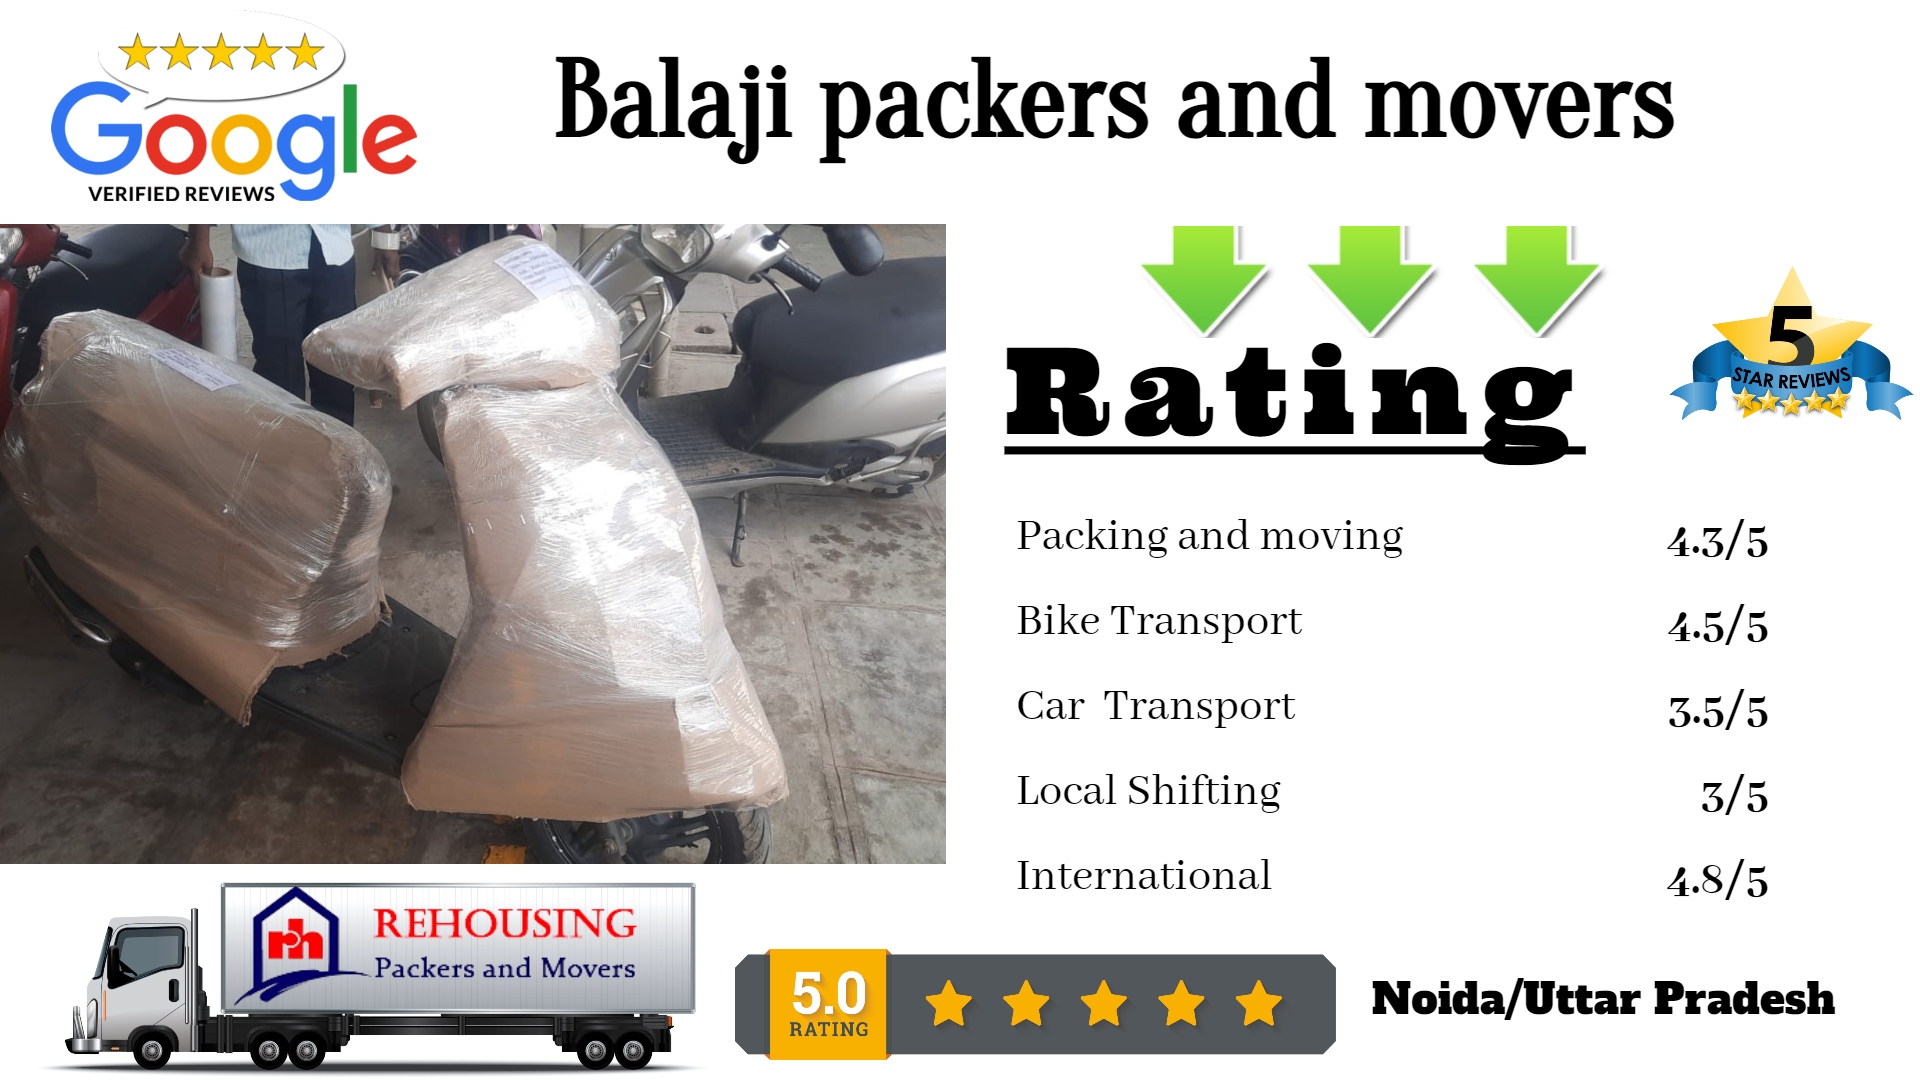 Balaji packers and movers  A - 17 Sector 4 Ground Floor, Noida,201301